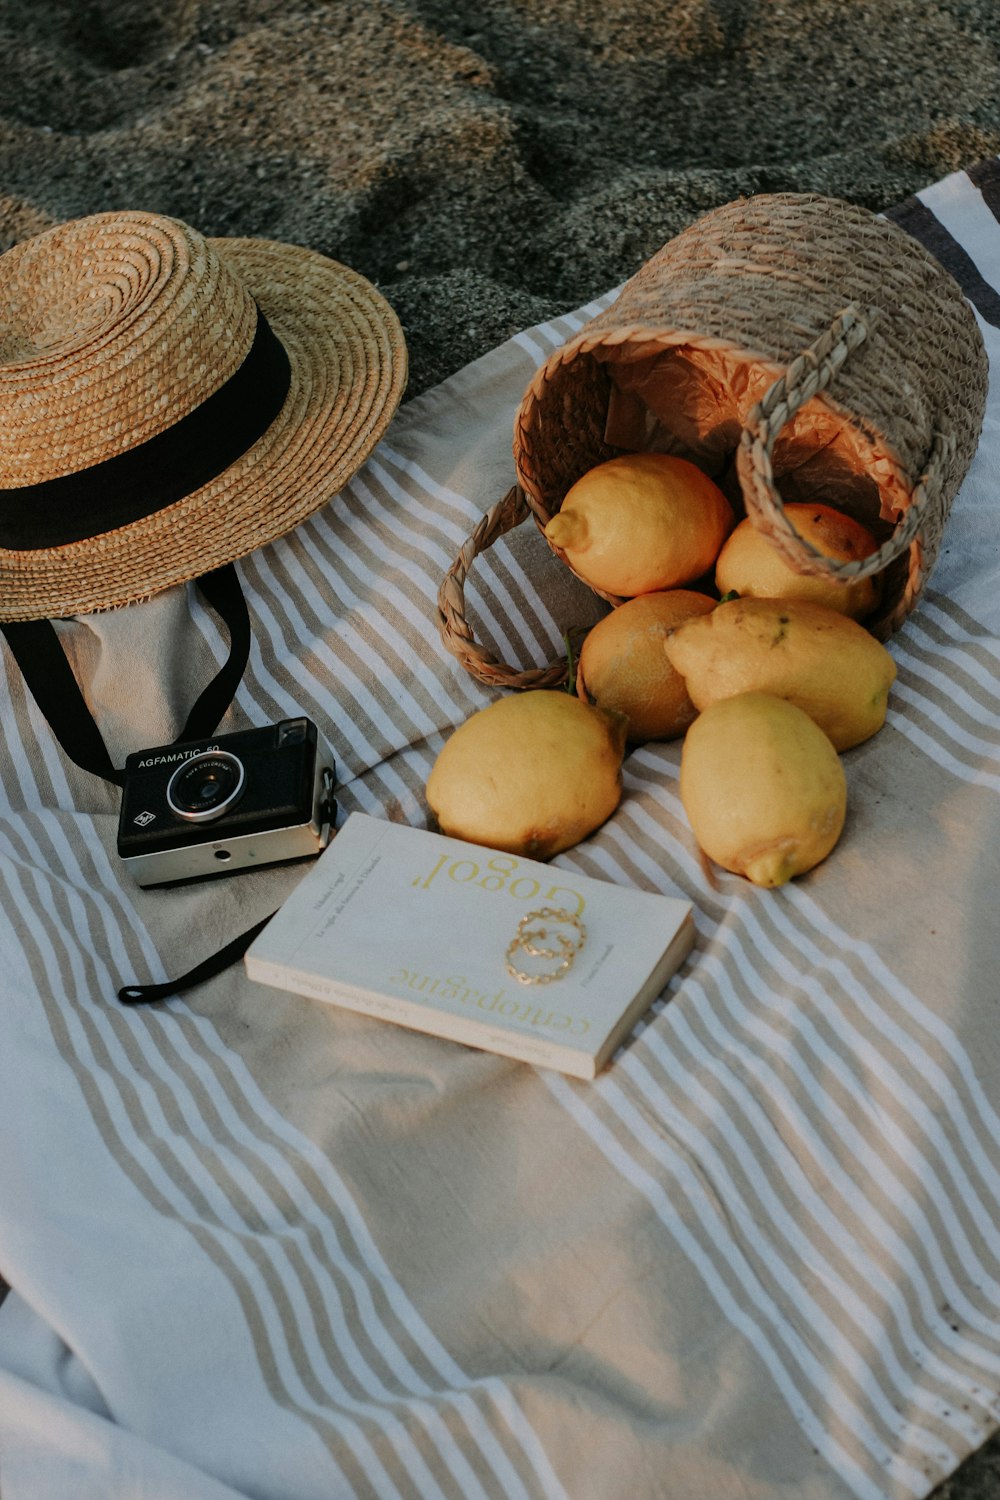 a bag of lemons, a book, and a straw hat on a towel